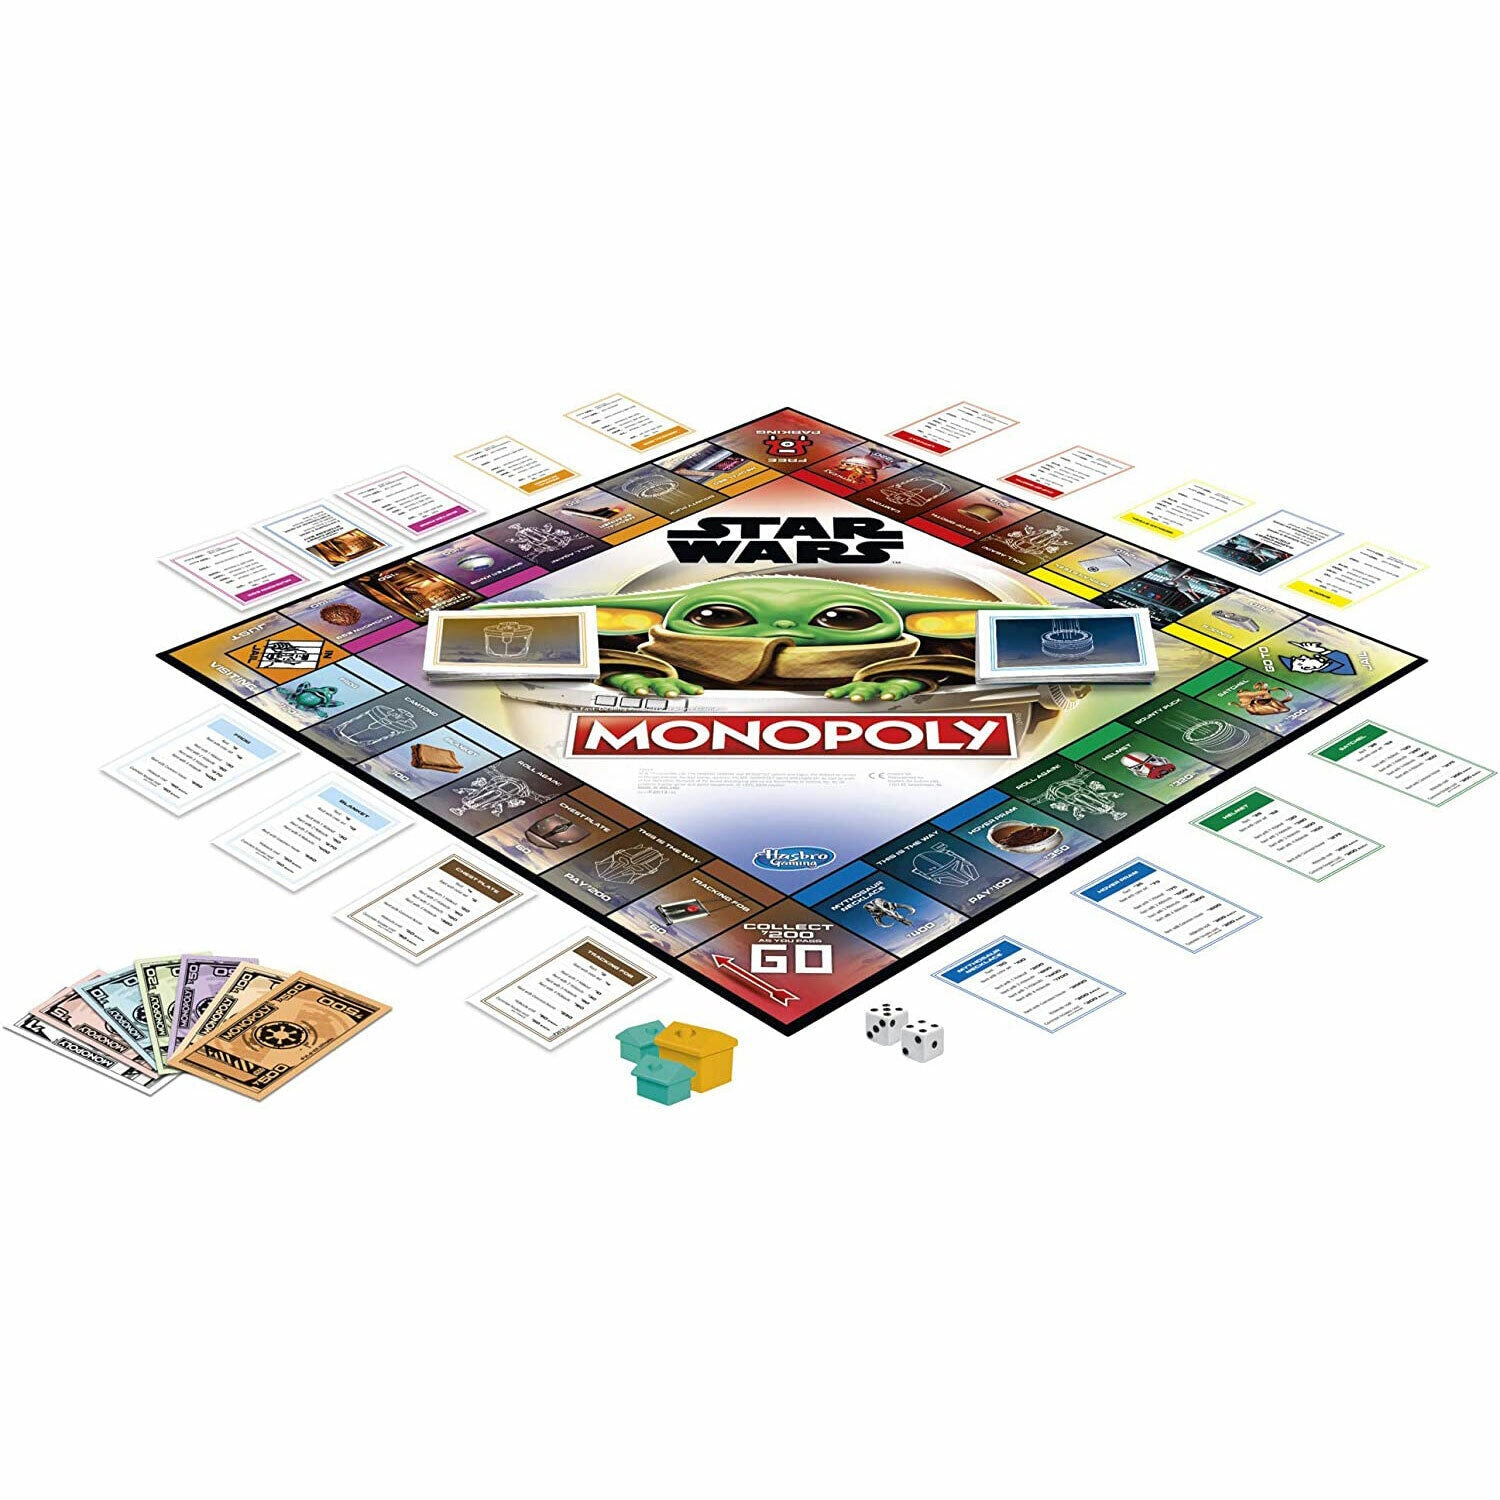 New Monopoly Star Wars The Child Edition Board Game - Sealed Box